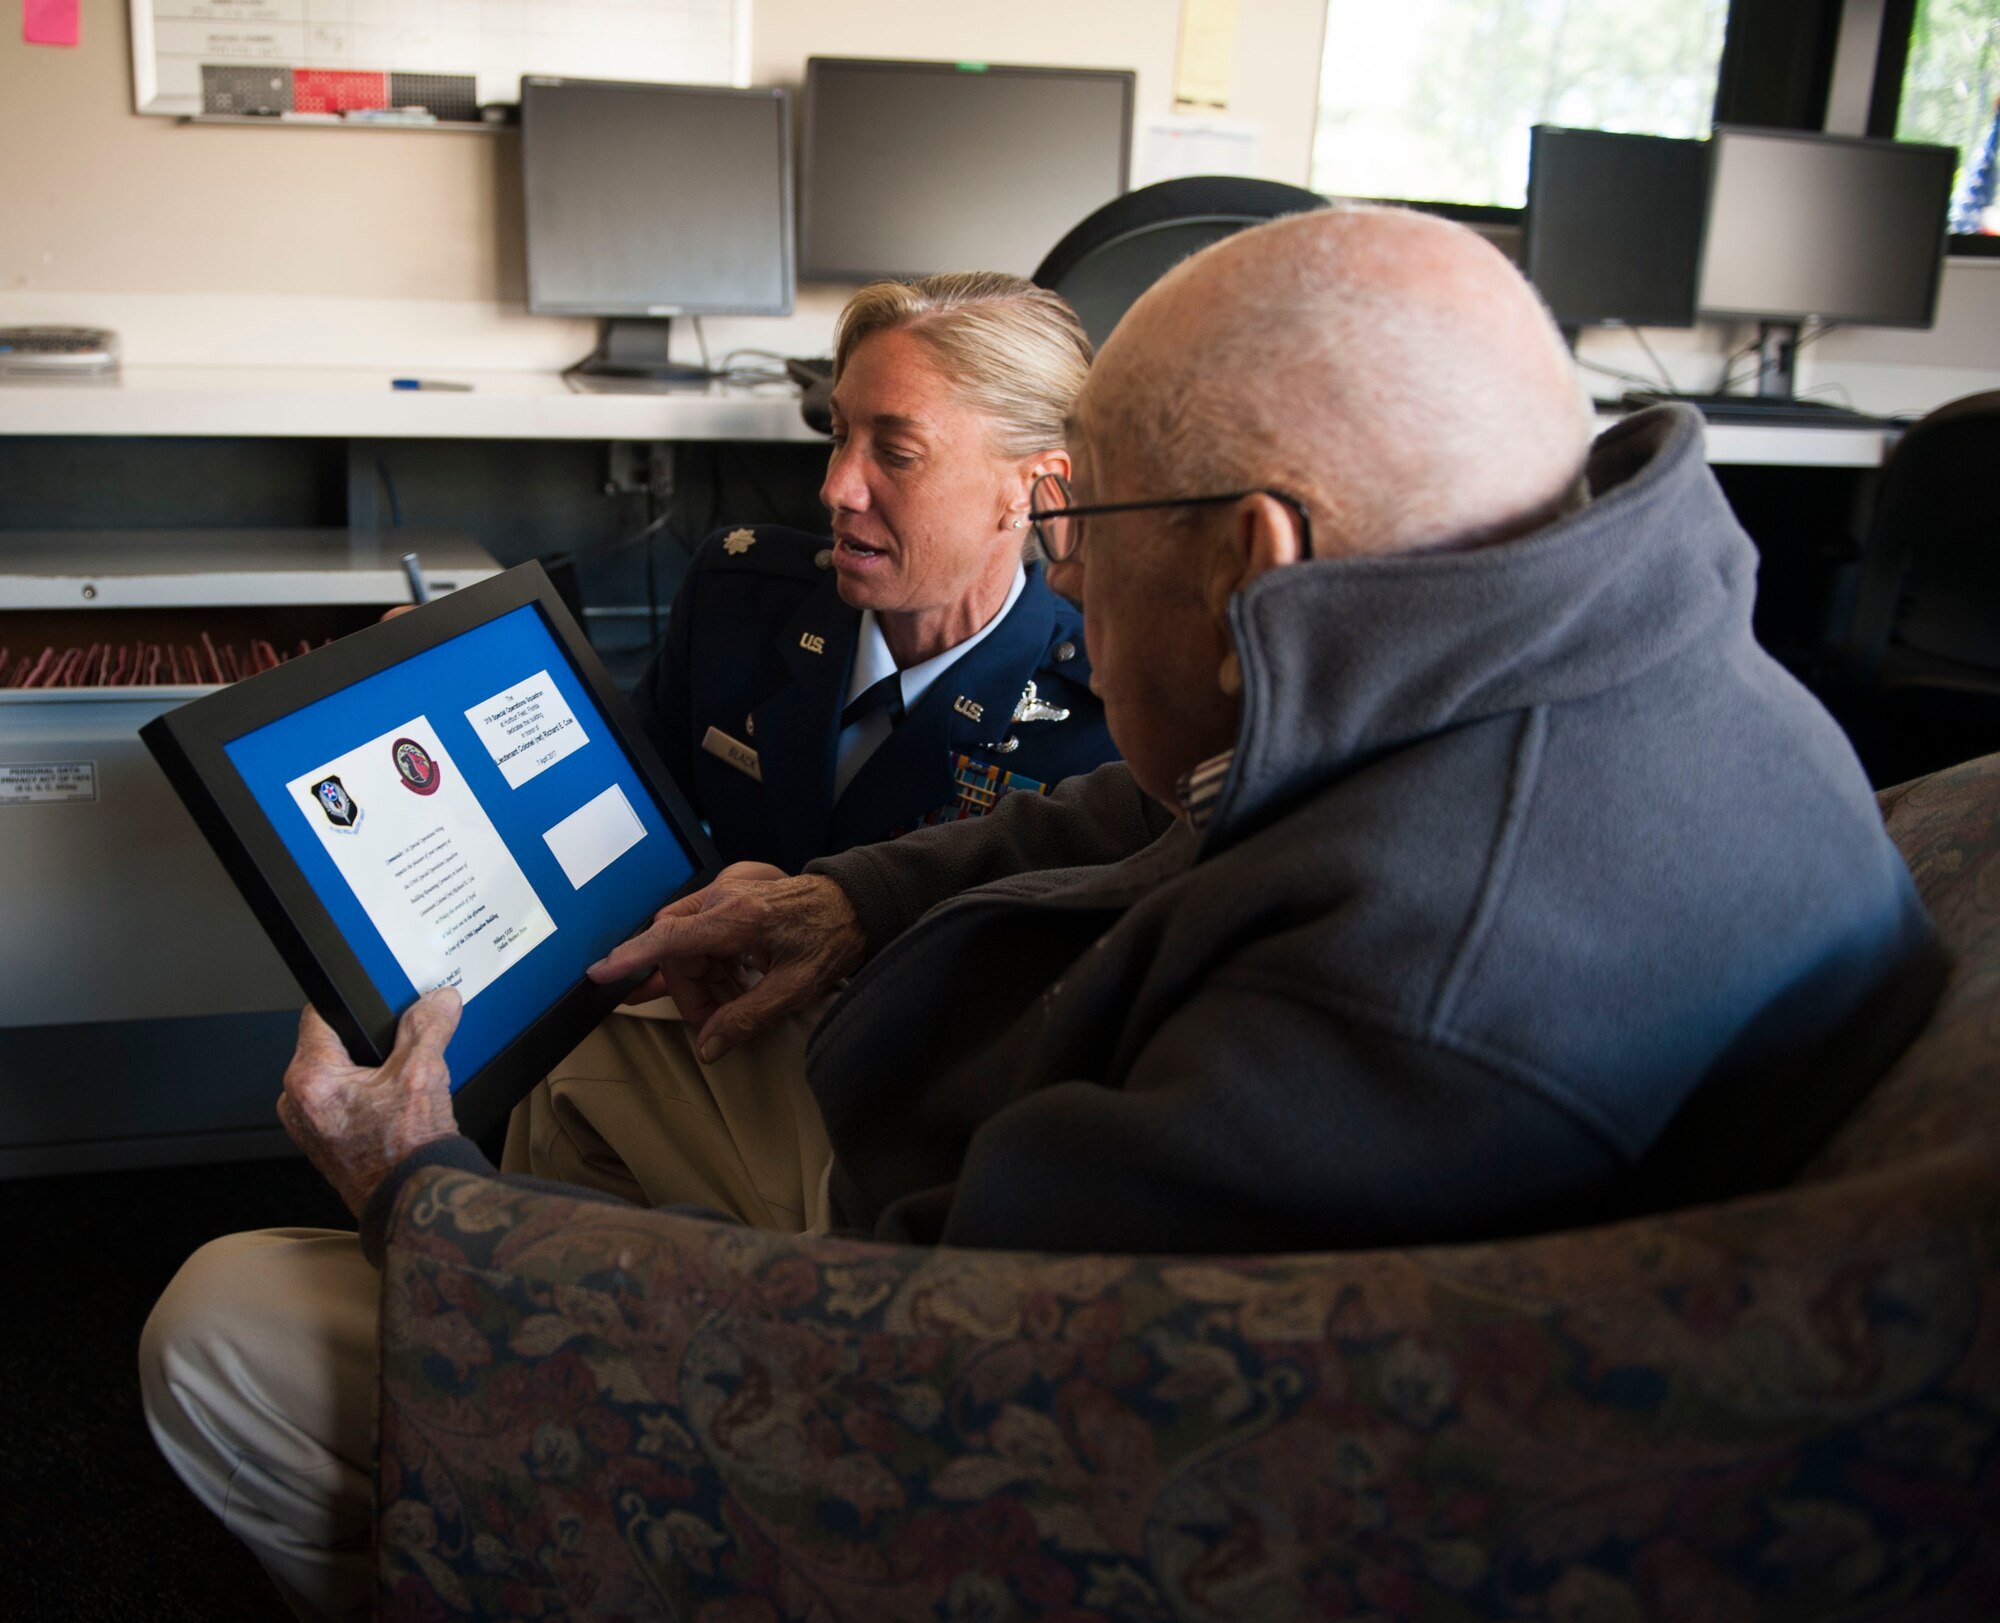 Lt. Col. Allison Black, commander of the 319th Special Operation Squadron, shows retired Lt. Col. Richard E. Cole a framed invitation after a building renaming and dedication ceremony at Hurlburt Field, Fla., April 7, 2017. Cole is the last surviving Doolittle Raider whose Air Force roots date back to the origination of the 319th SOS. (U.S. Air Force photo by Senior Airman Krystal M. Garrett)